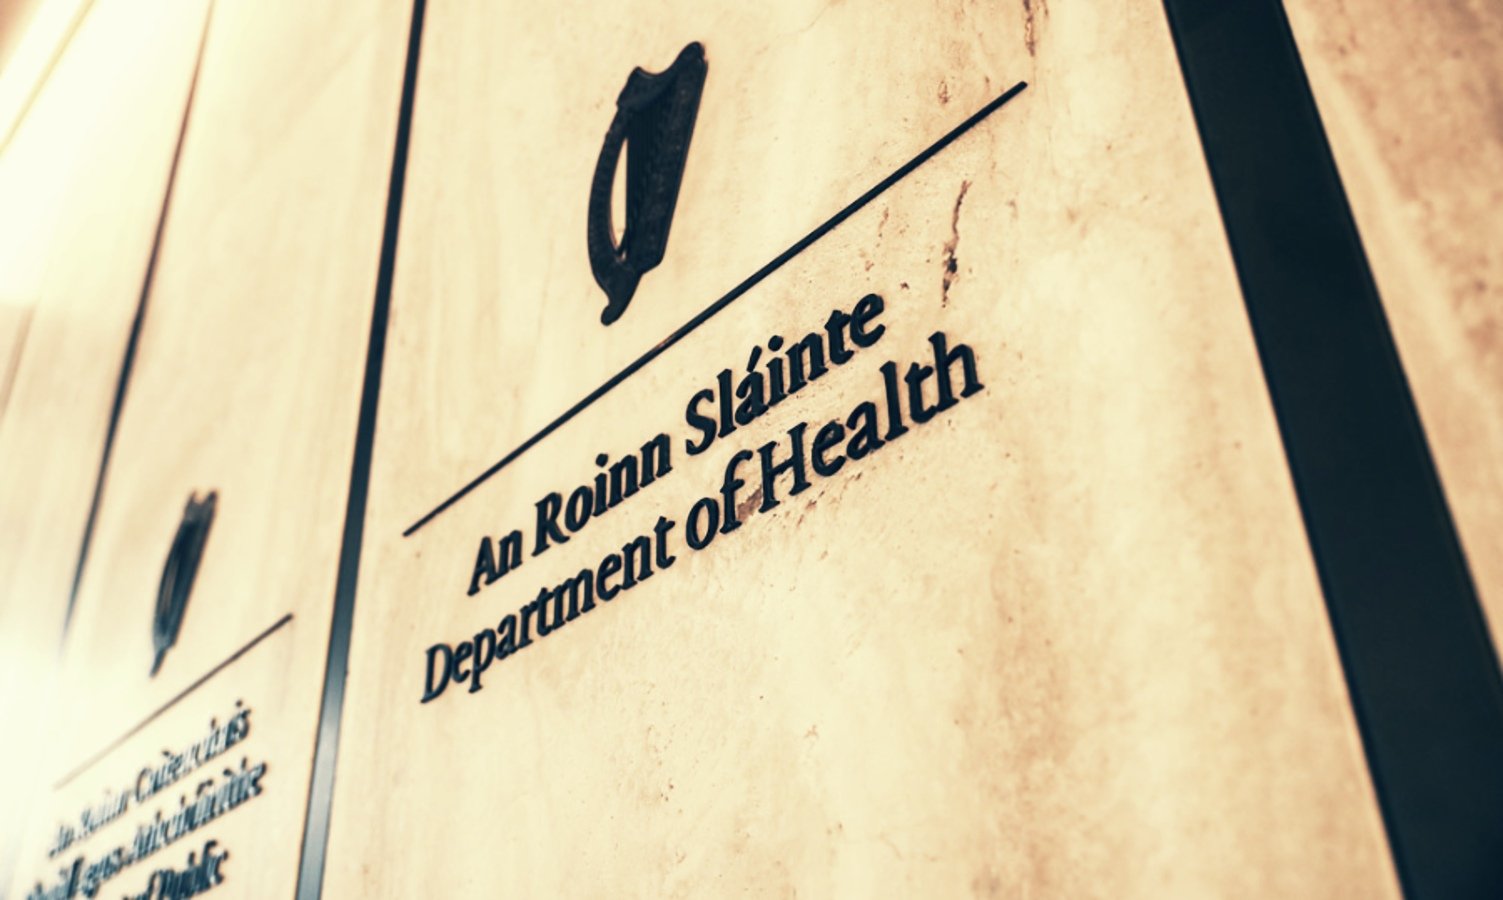 Conti ransomware also targeted Ireland's Department of Health